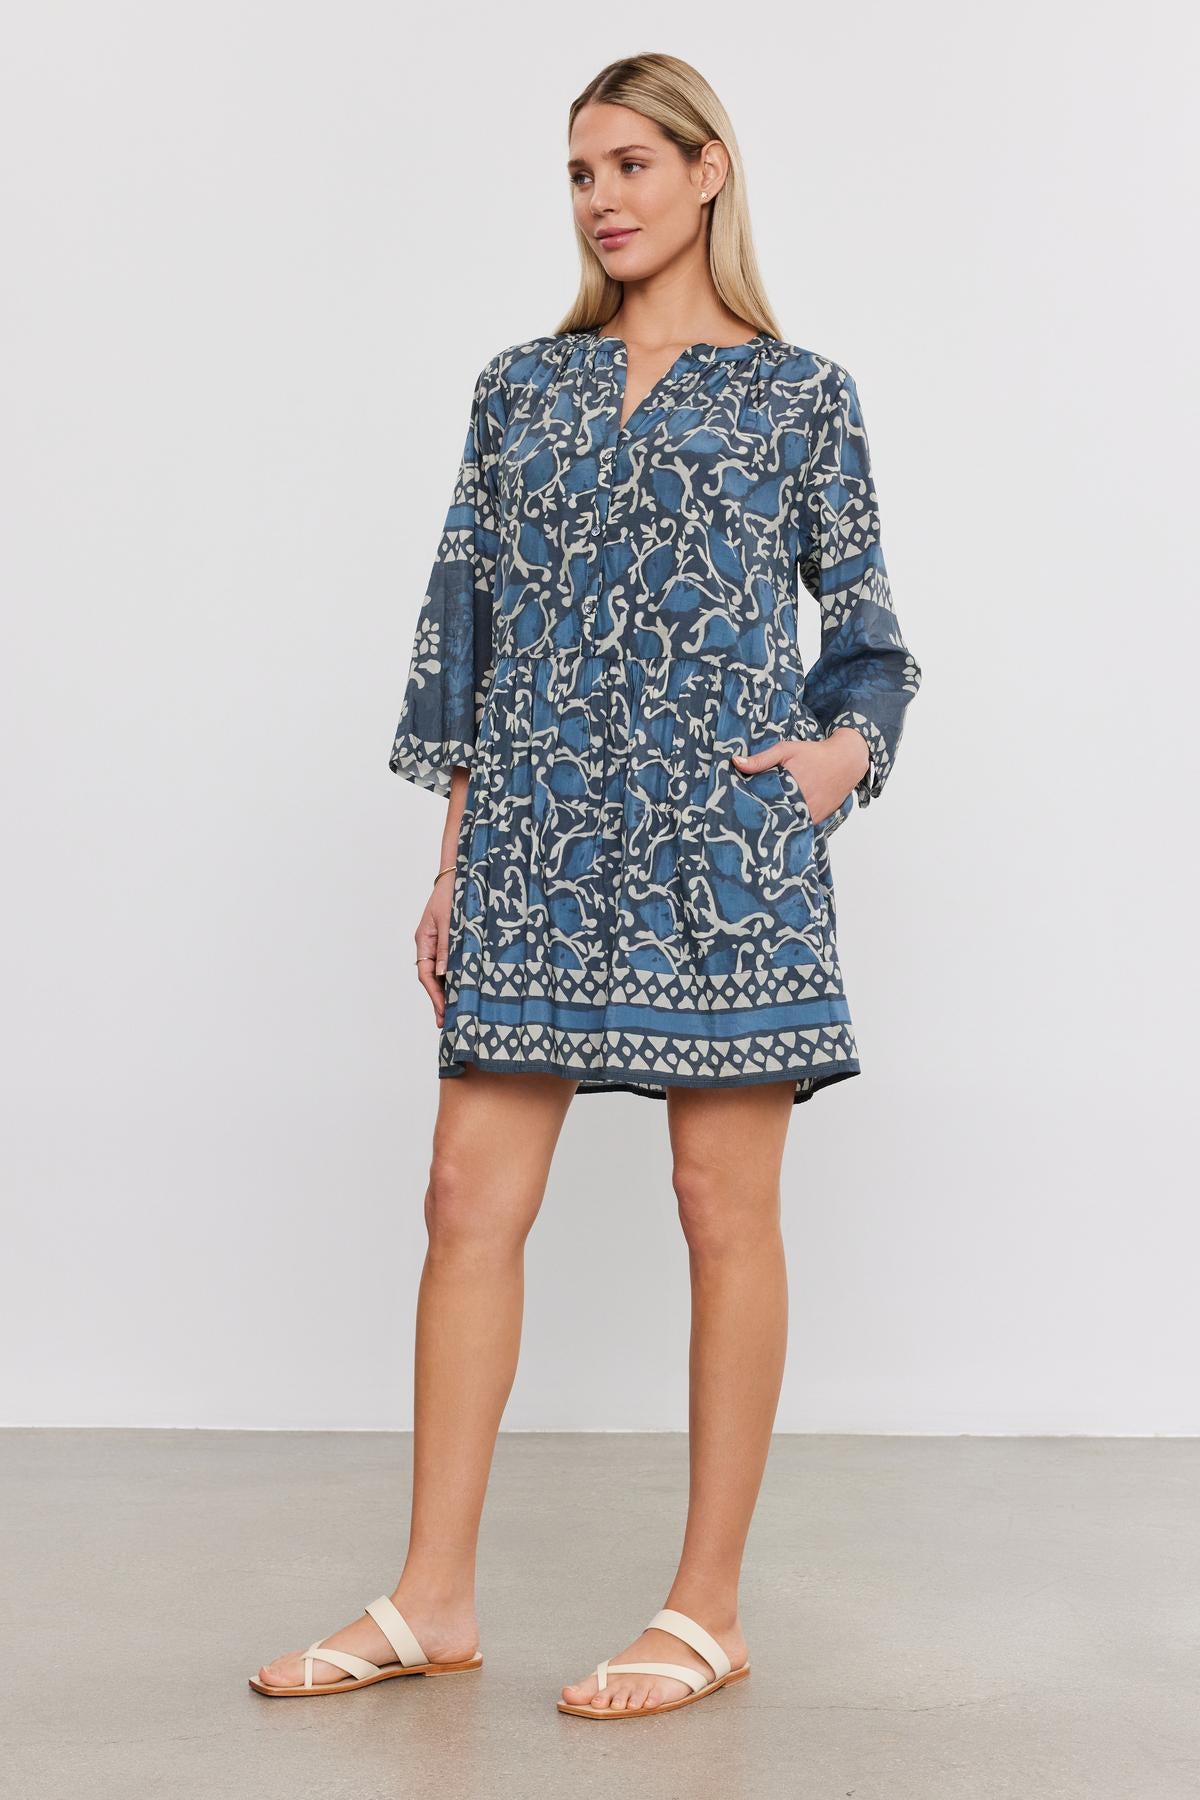 A woman models a blue printed tiered Talia dress with 3/4 sleeves and white sandals, standing against a plain white background from Velvet by Graham & Spencer.-36910103888065